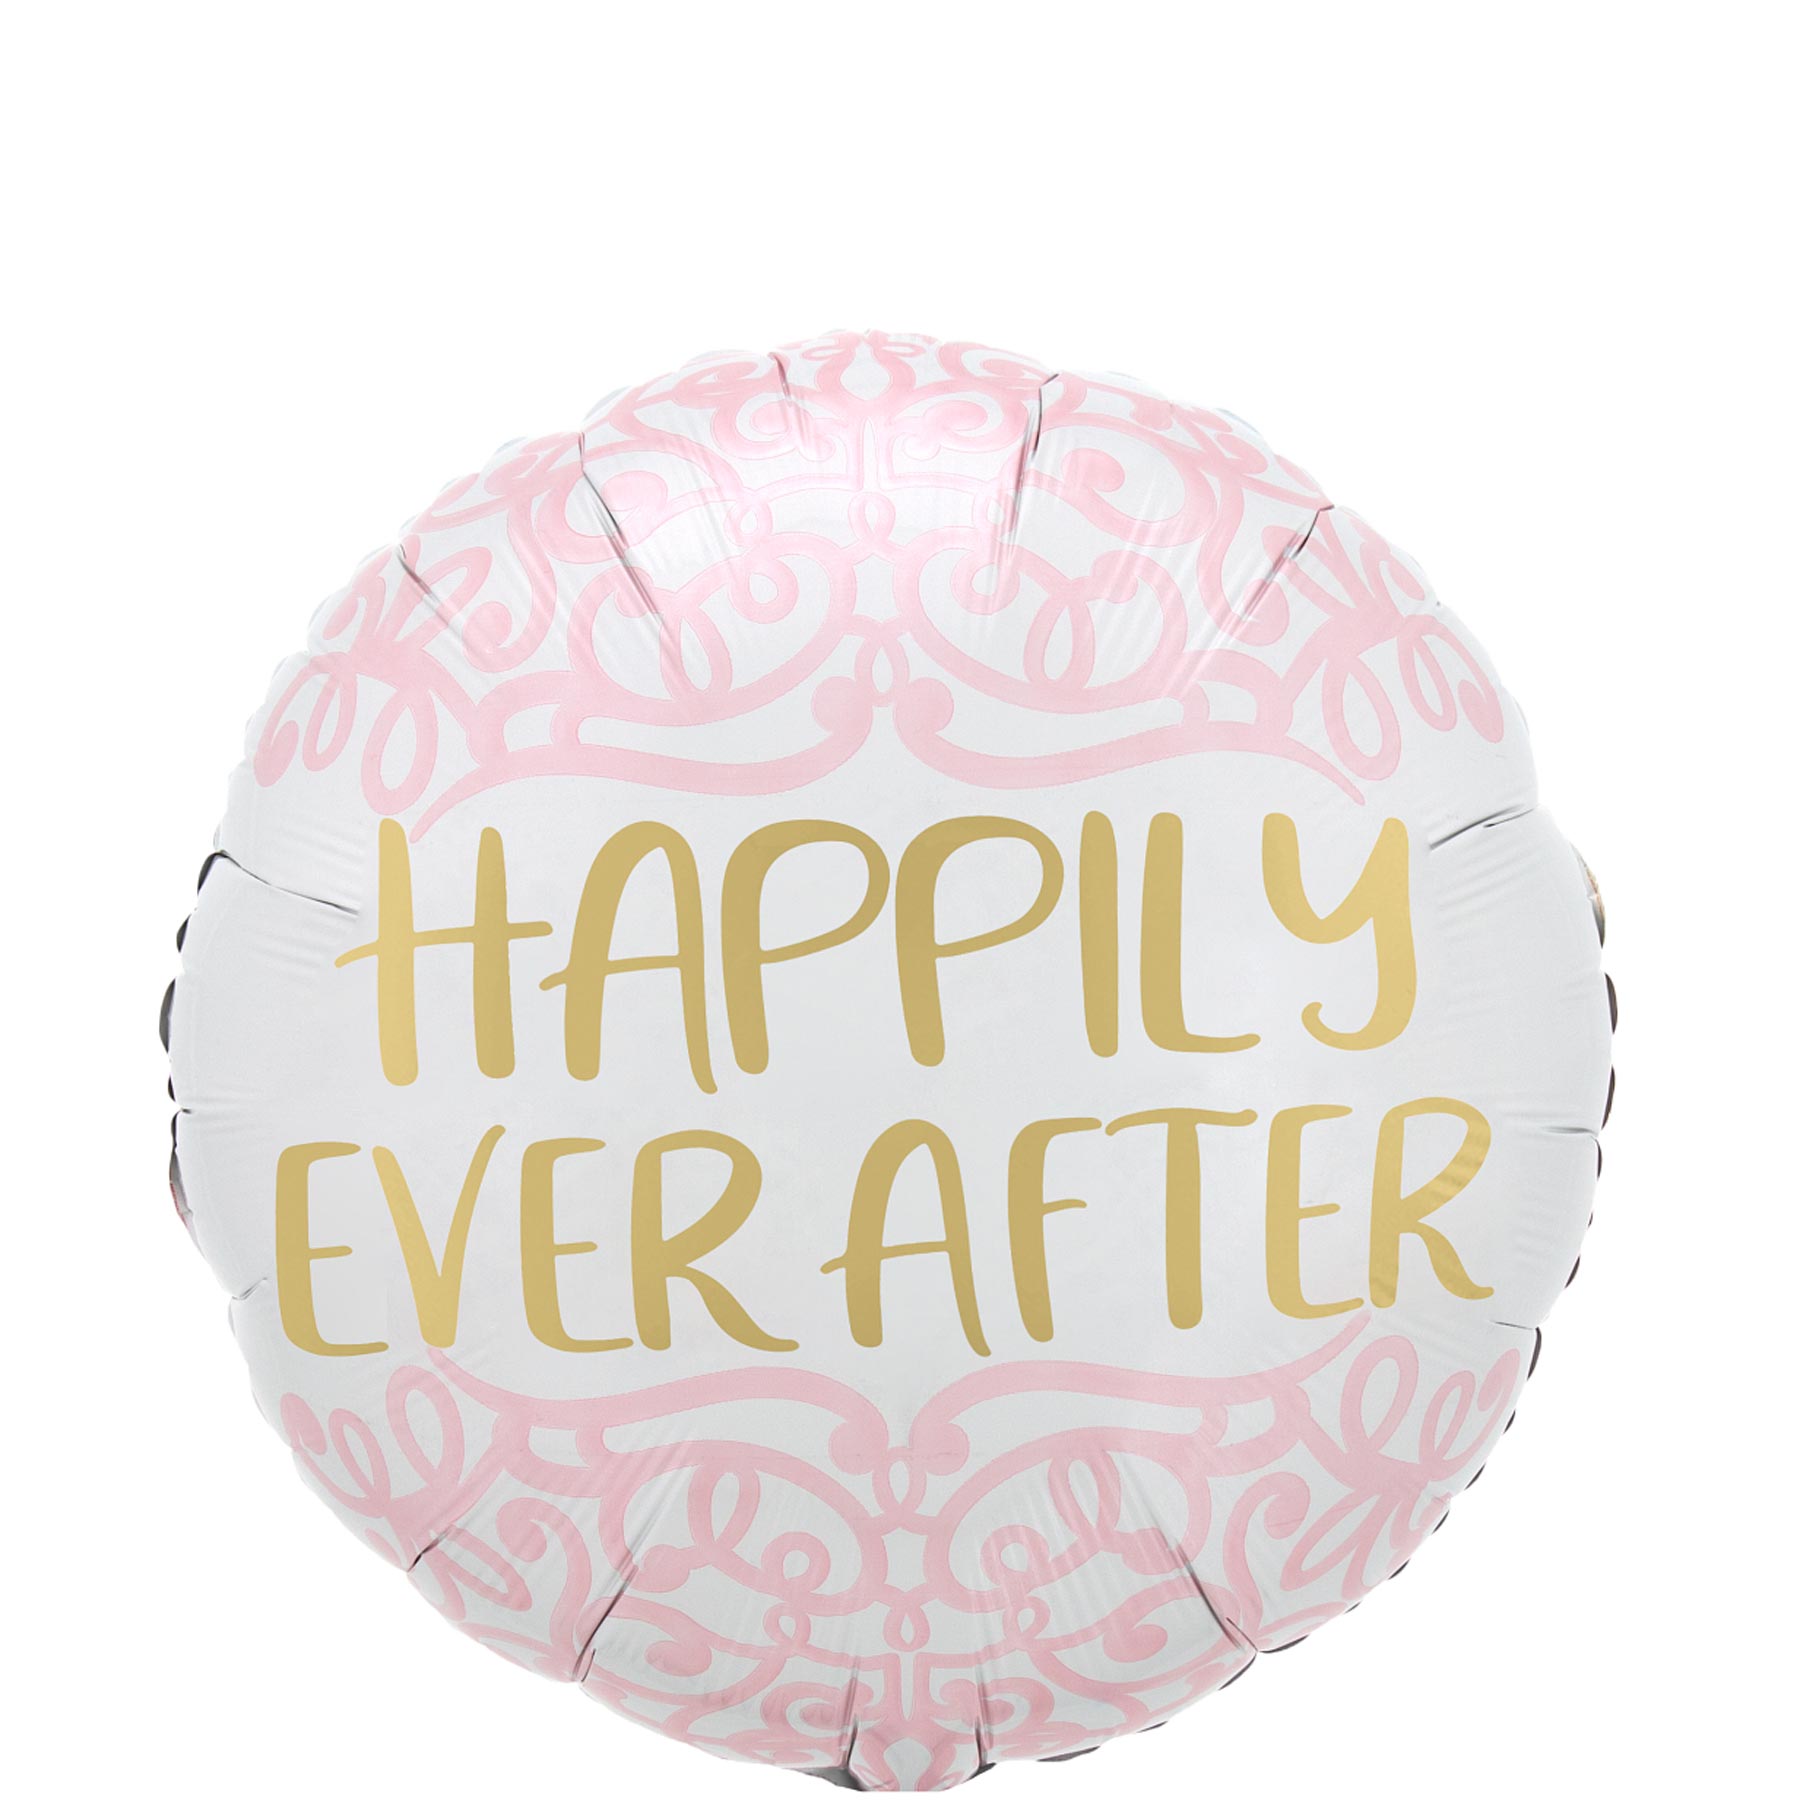 Happily Ever After Flourish Foil Balloon 45cm